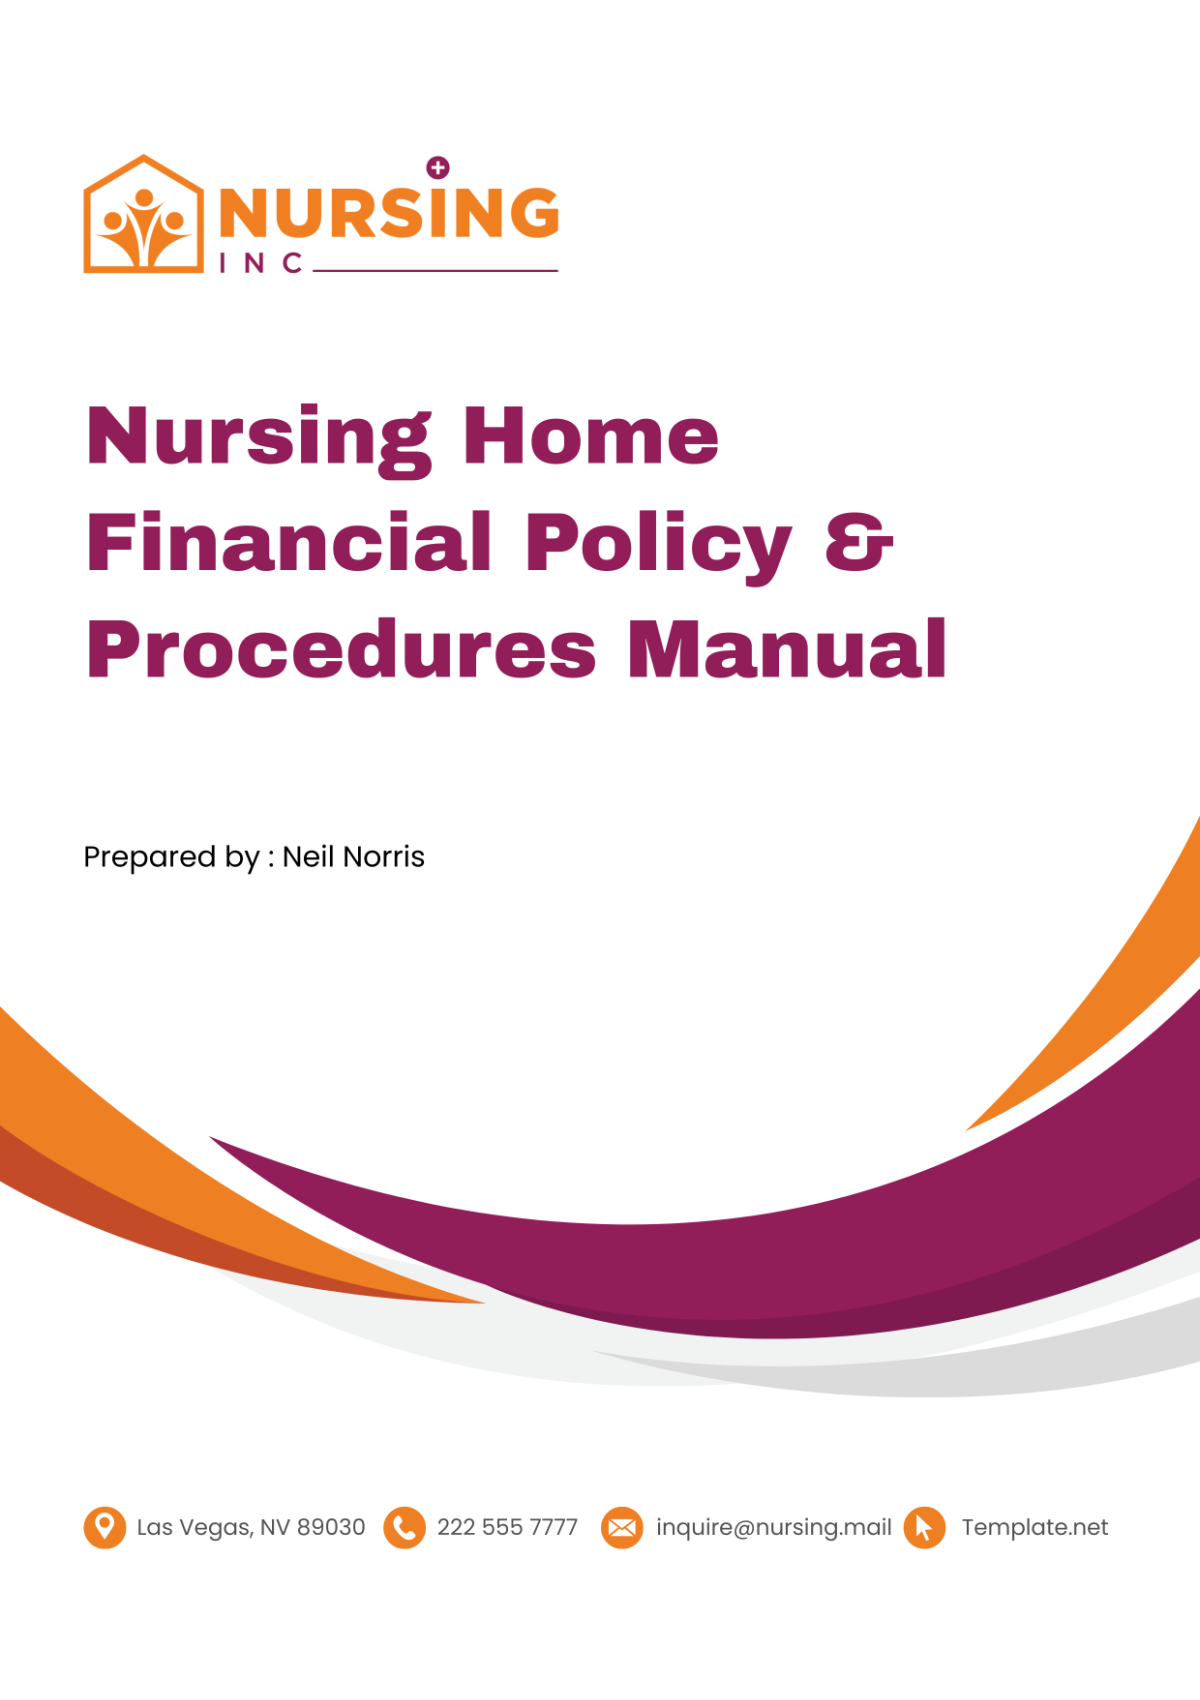 Free Nursing Home Financial Policy & Procedures Manual Template